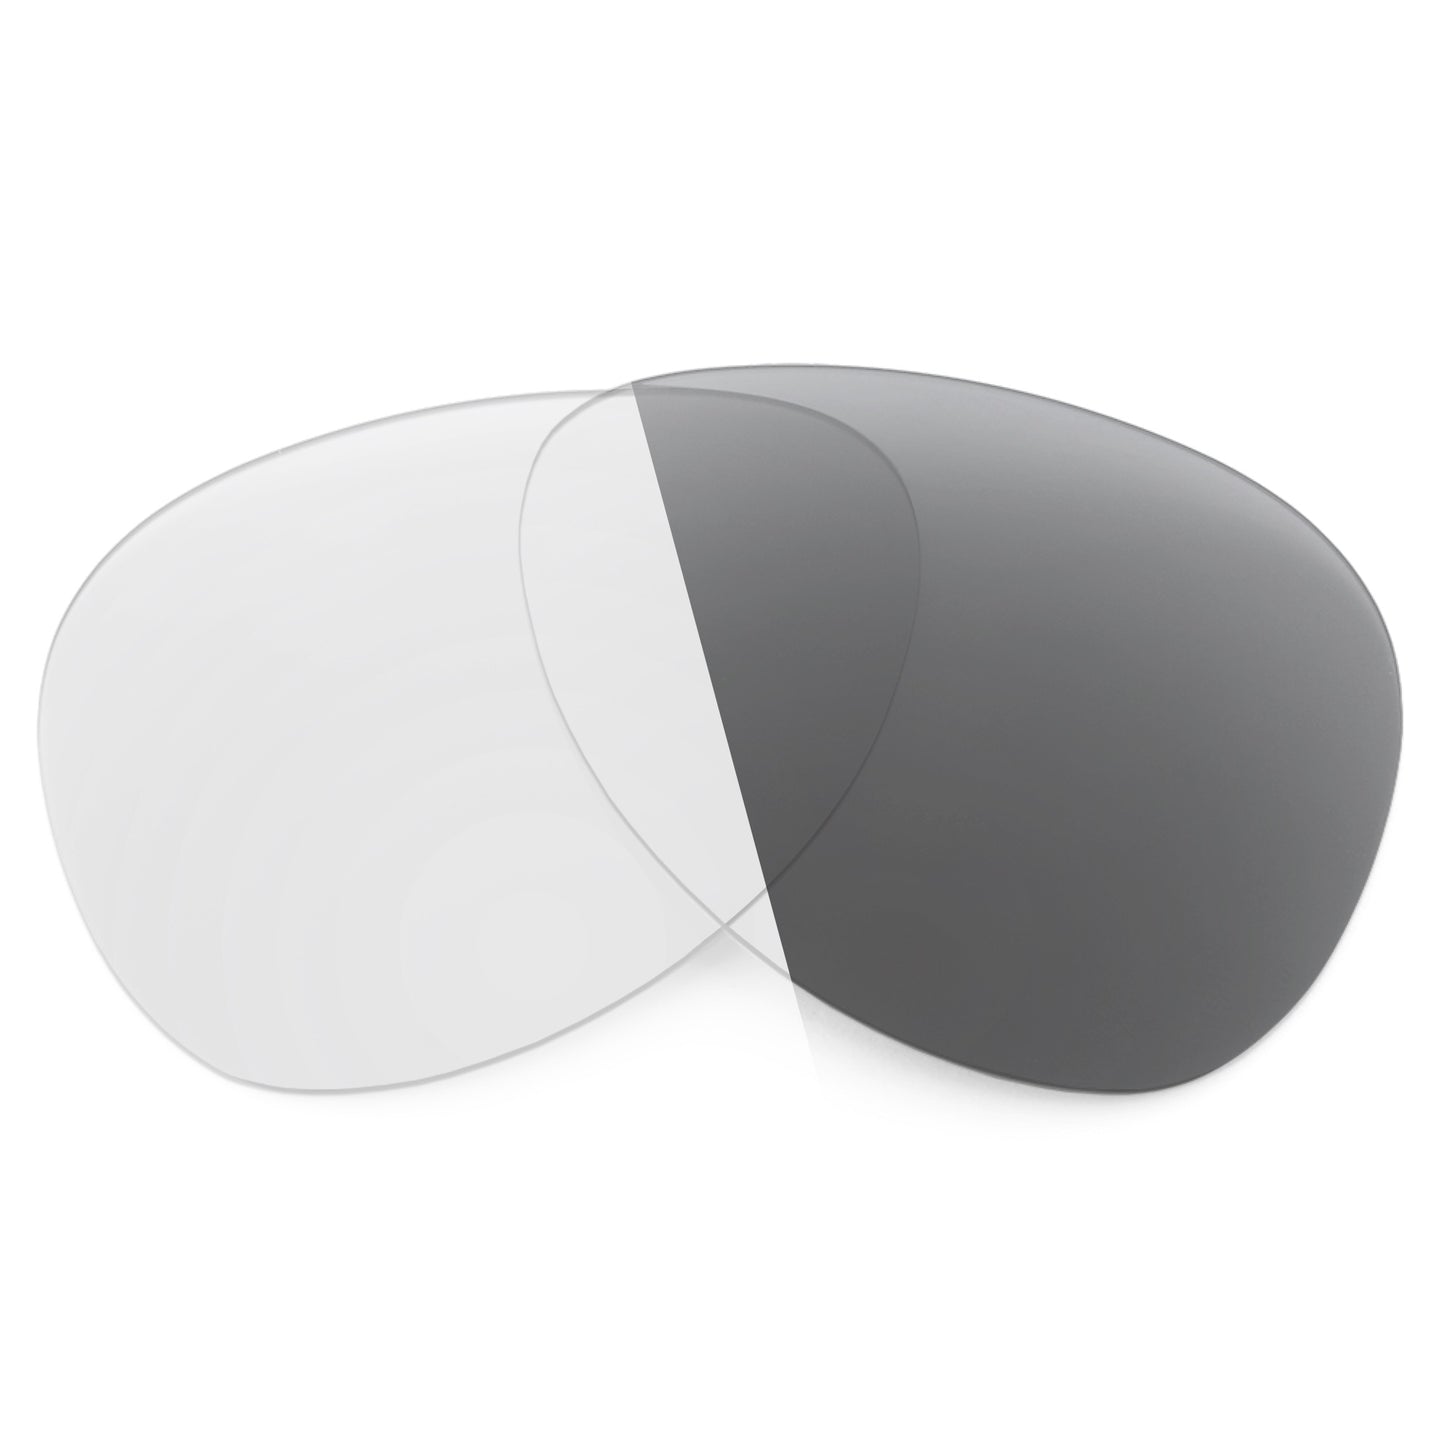 Revant replacement lenses for Ray-Ban RB3509 63mm Non-Polarized Adapt Gray Photochromic